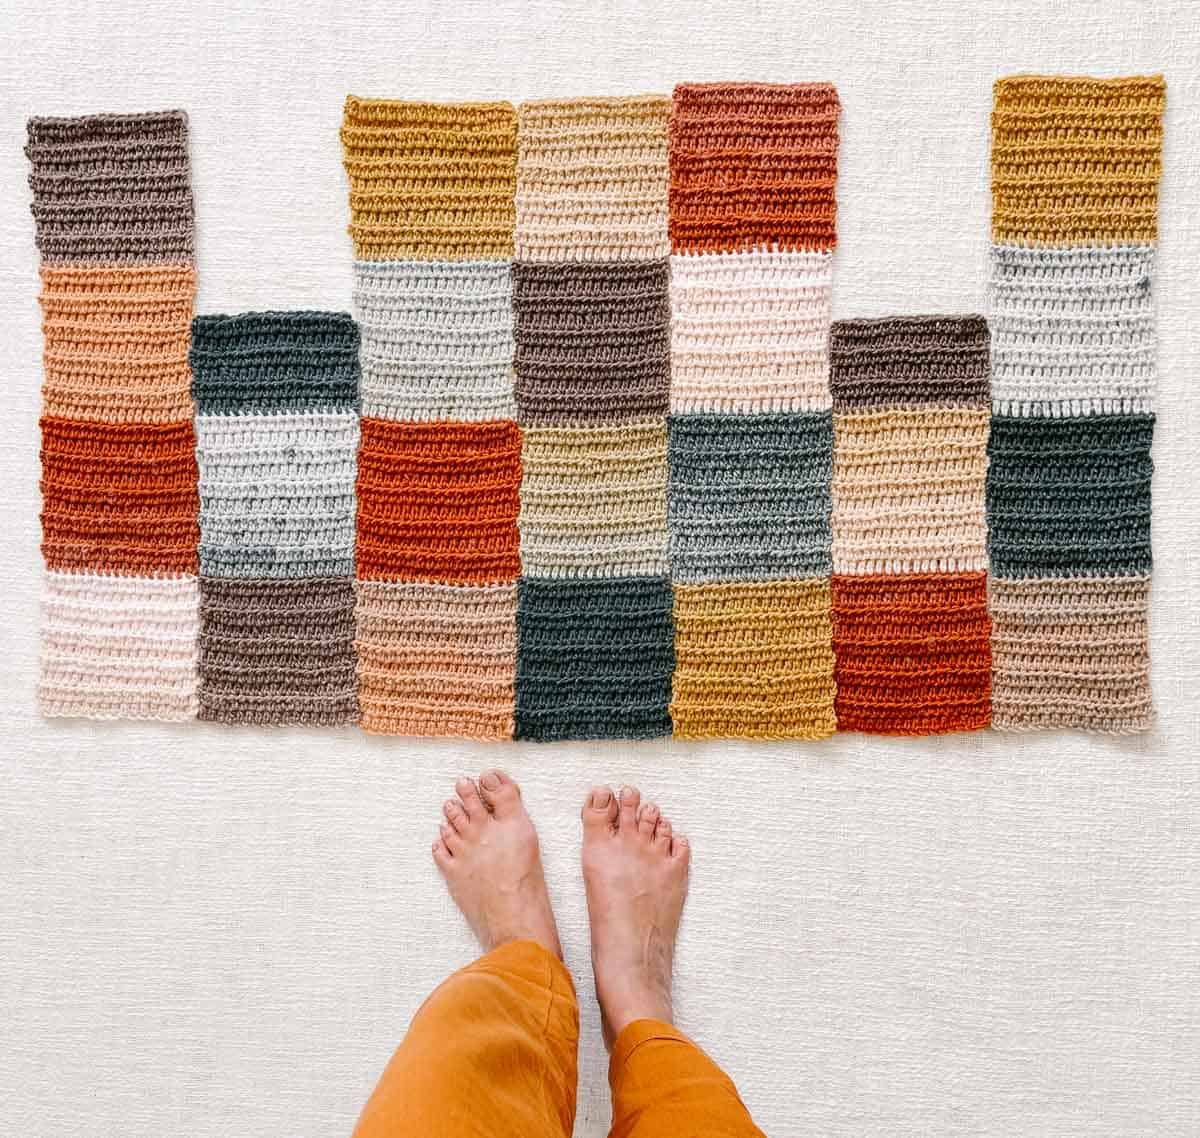 An overhead view of a colorful in-progress crochet patchwork sweater and a caucasian women's feet.